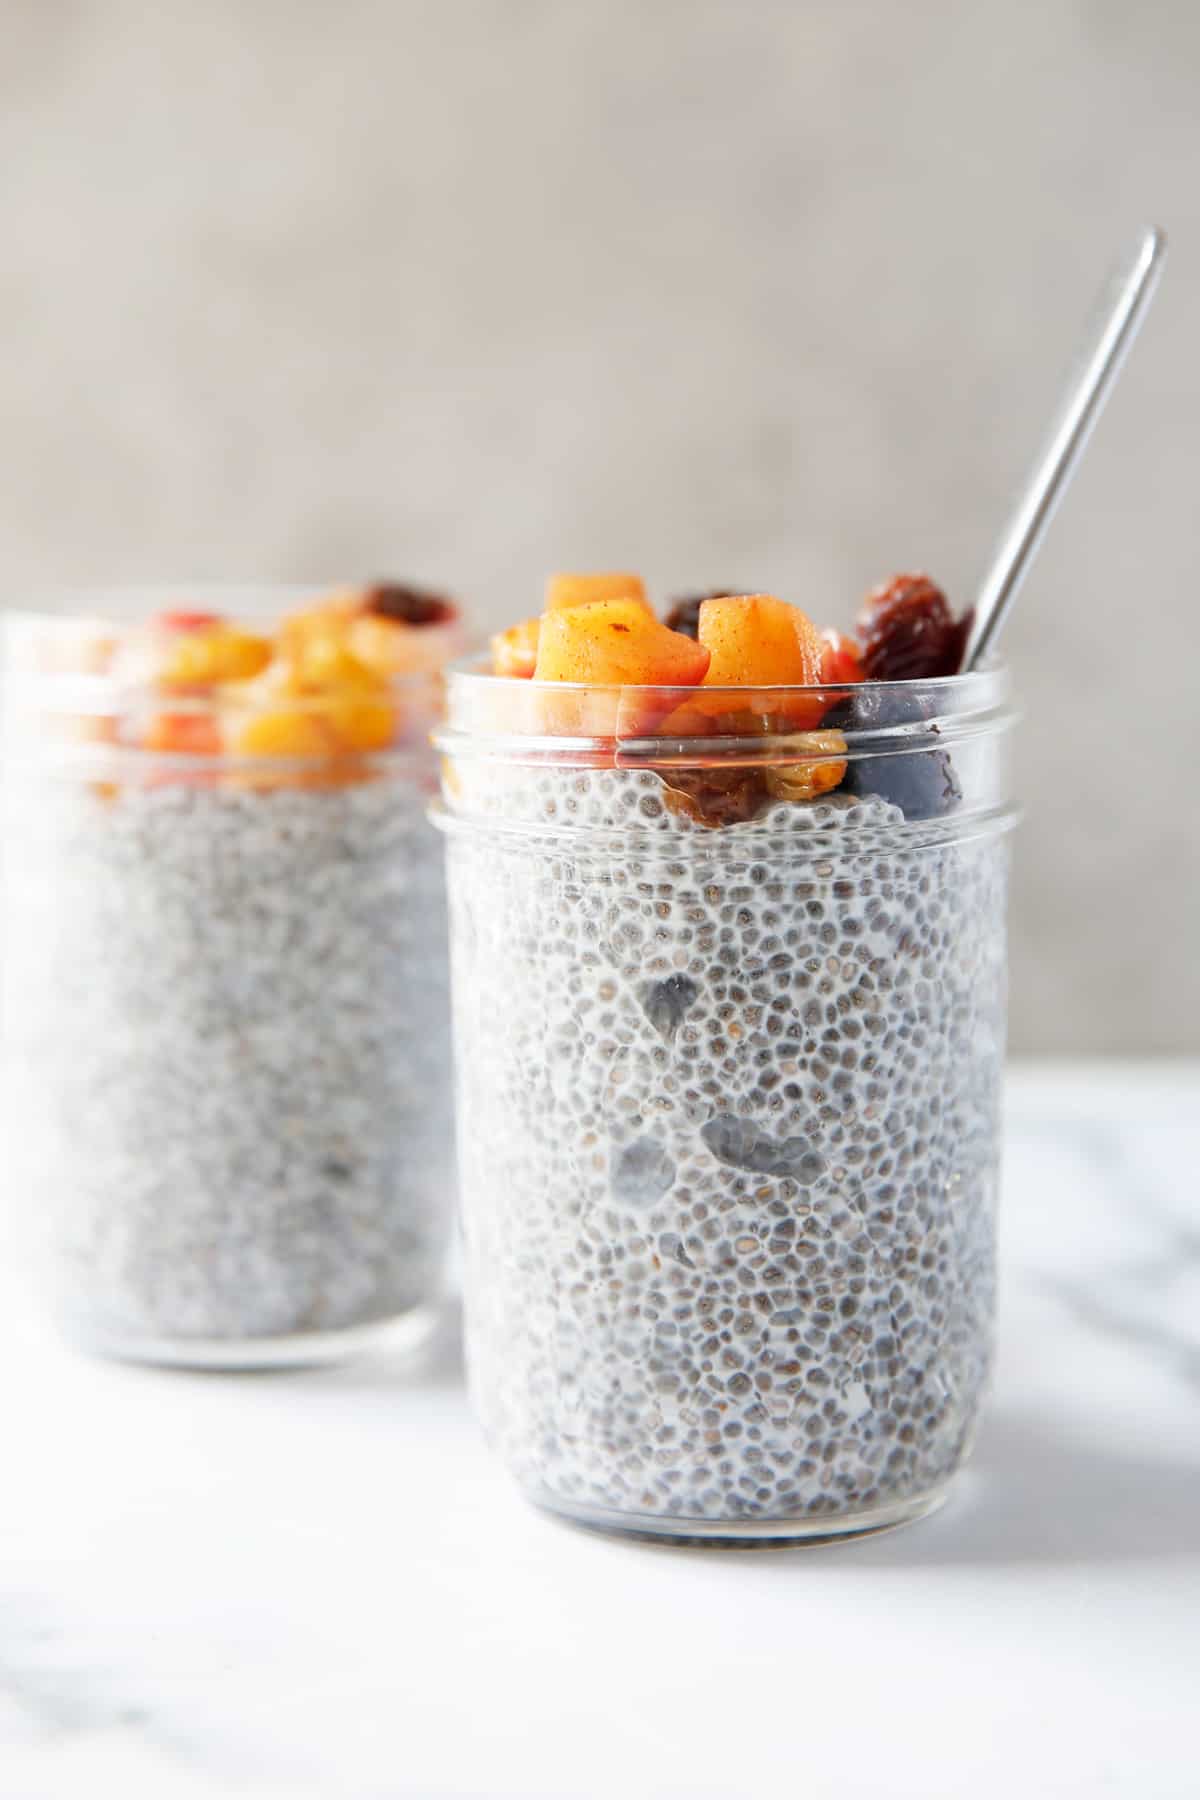 apple chia seed pudding in a jar